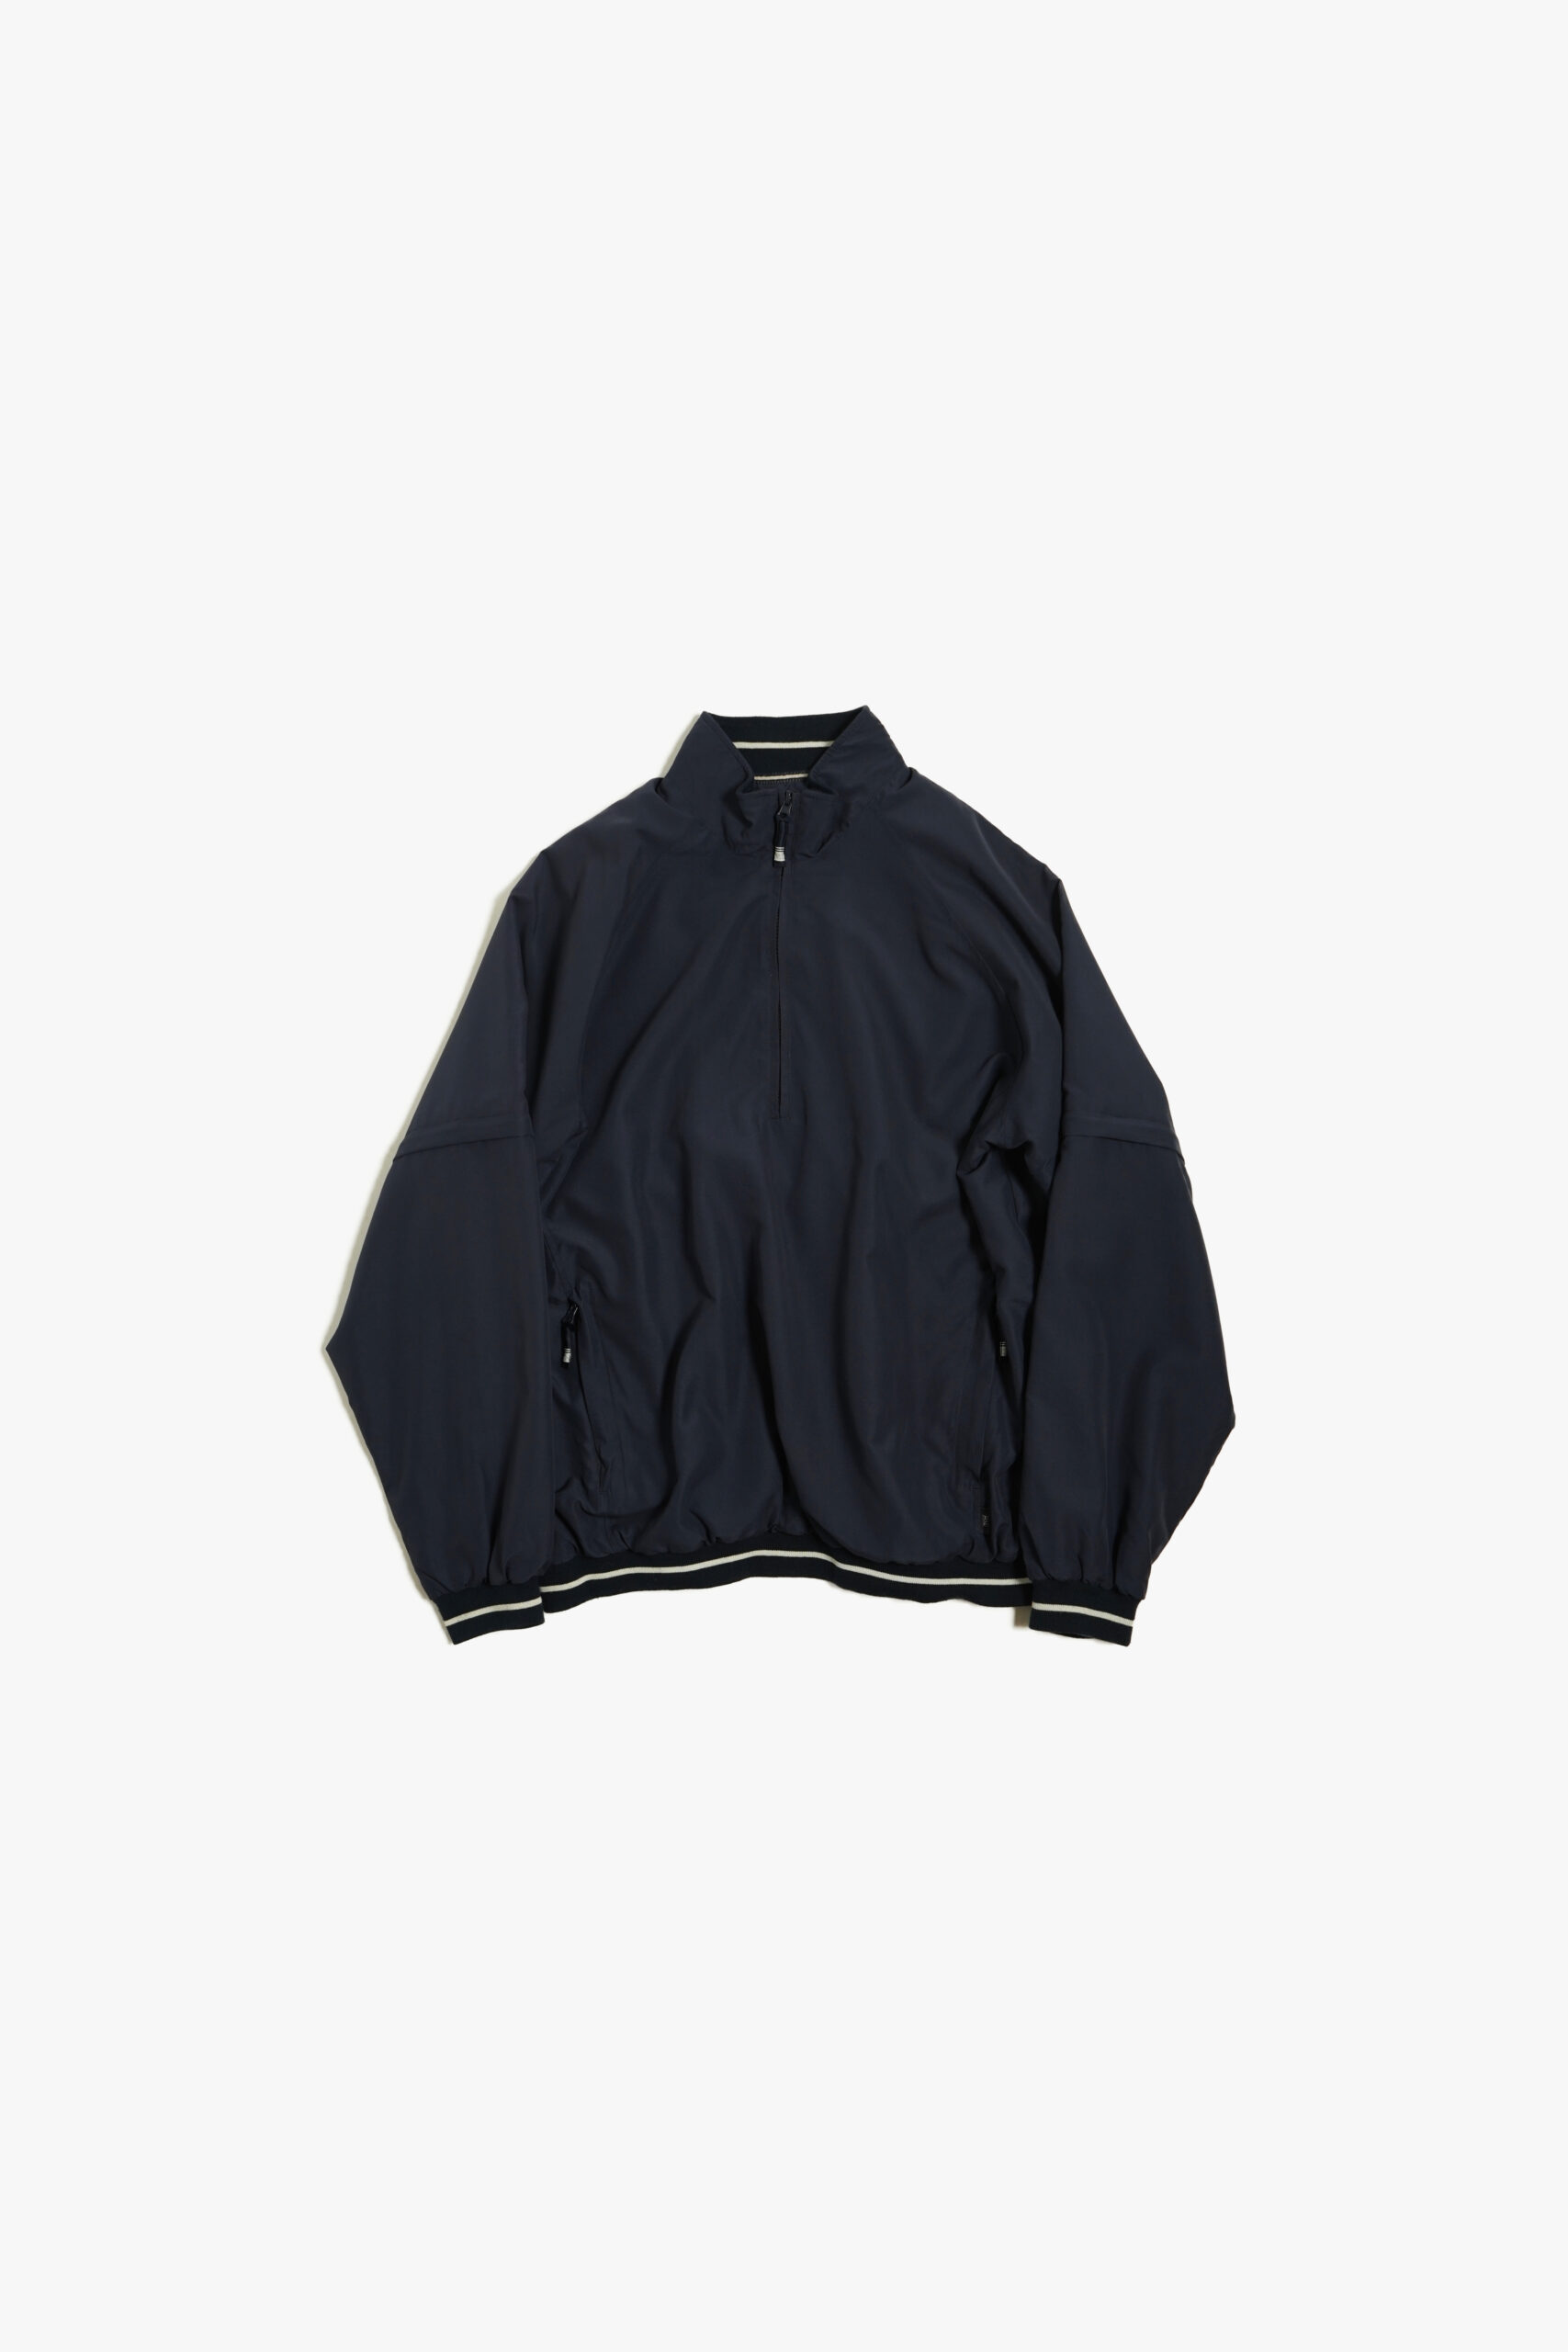 TCM CONVERTIBLE PULLOVER JACKET MADE IN ITALY NAVY